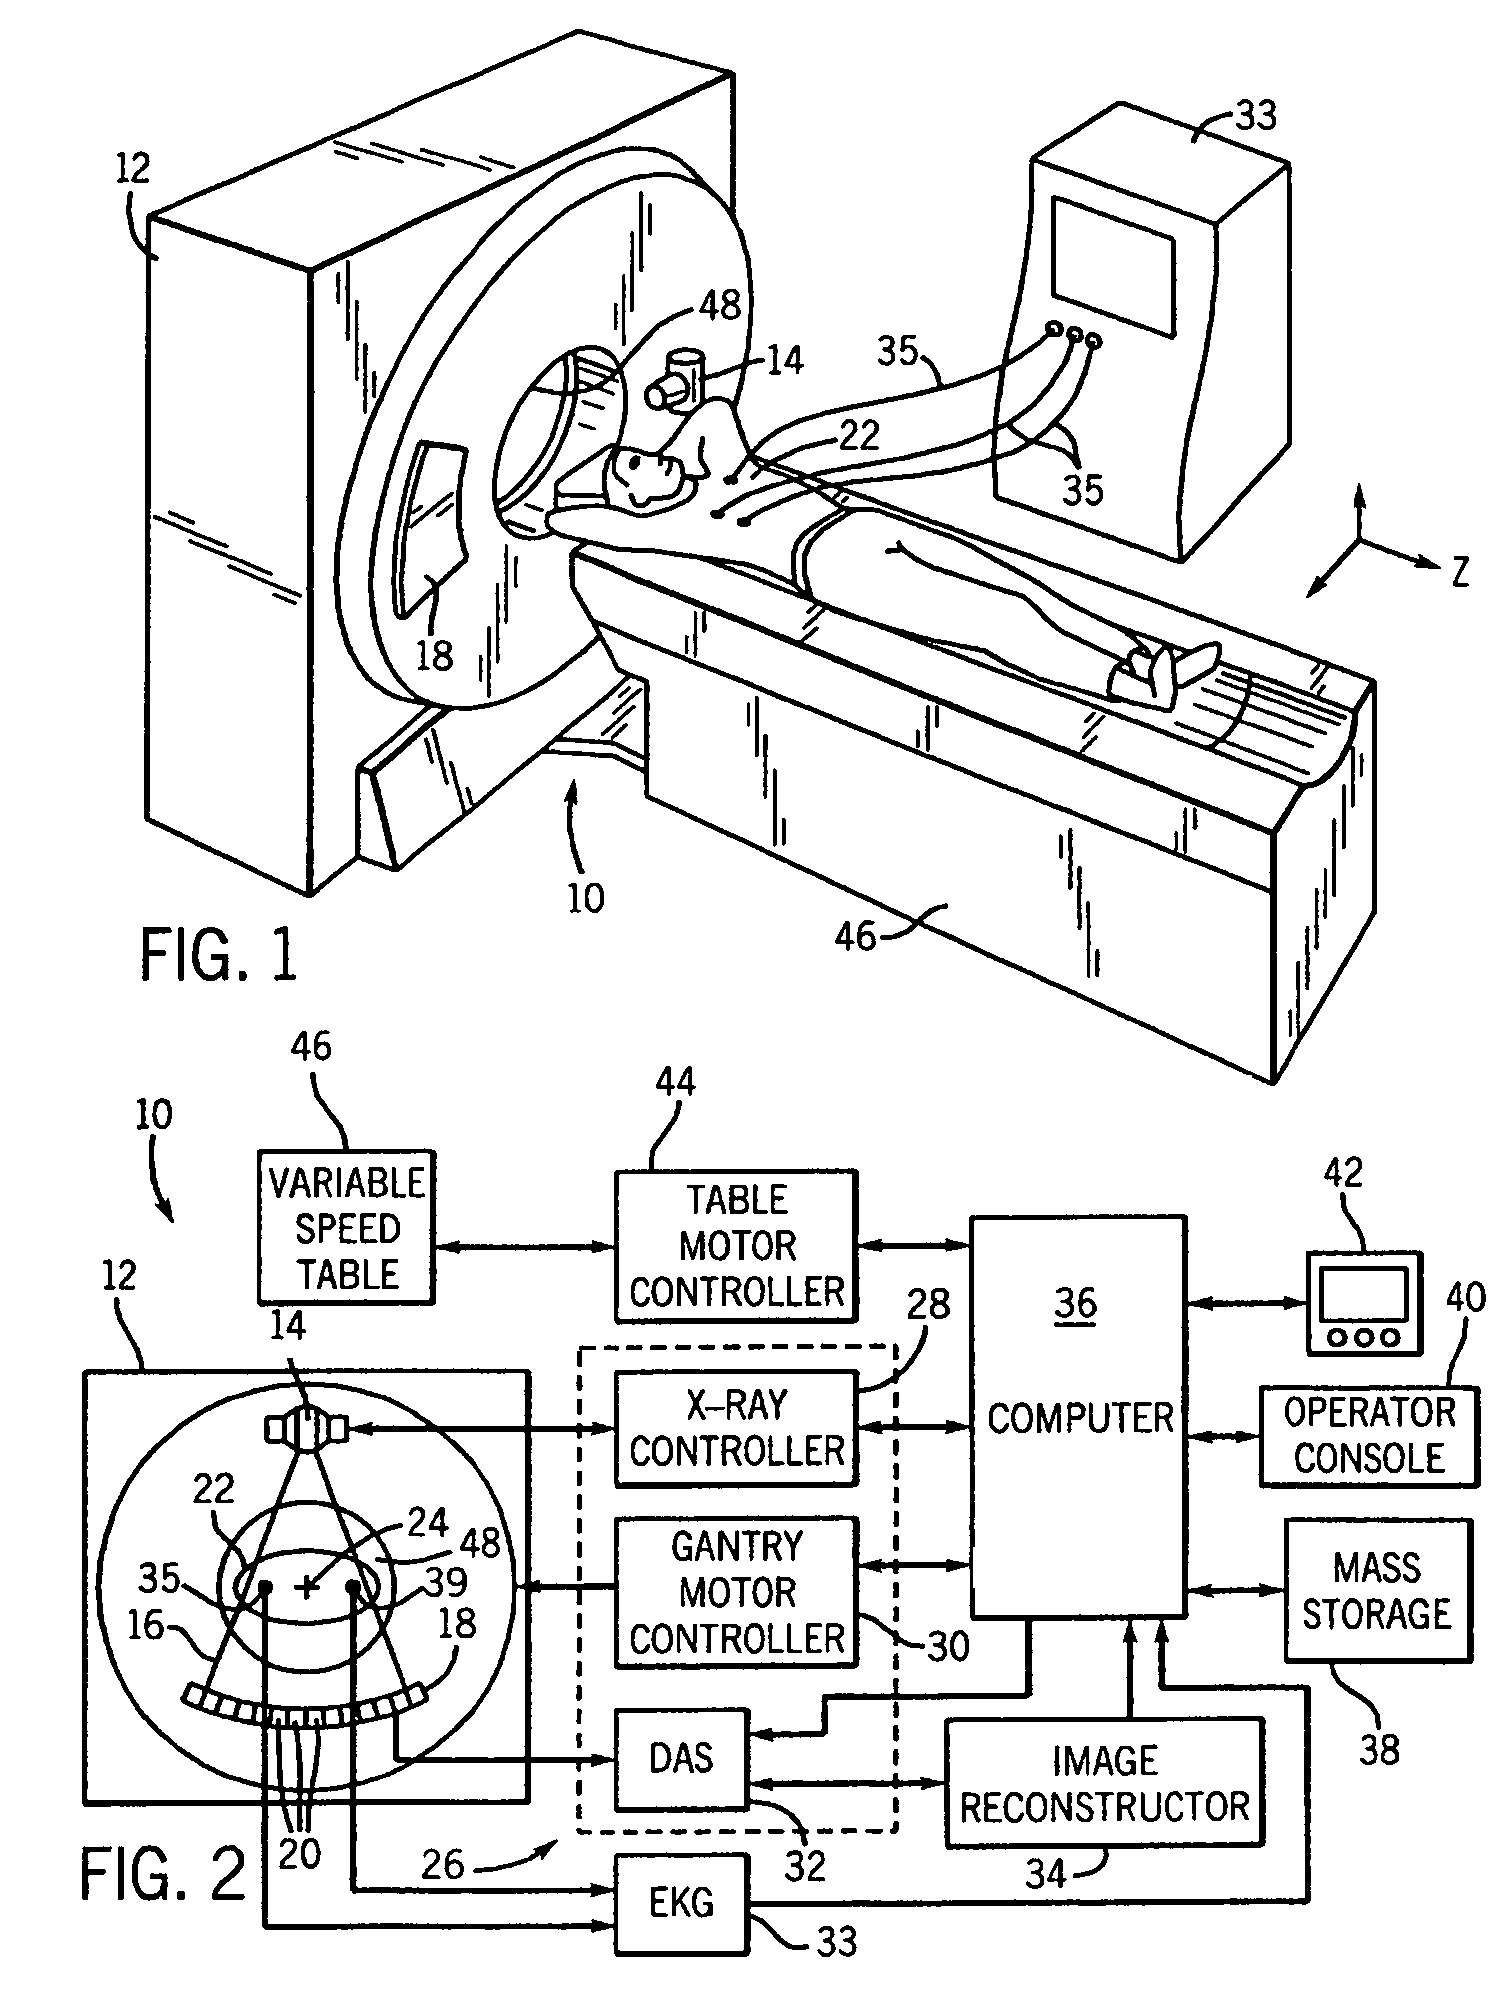 Method and apparatus of multi-phase cardiac imaging